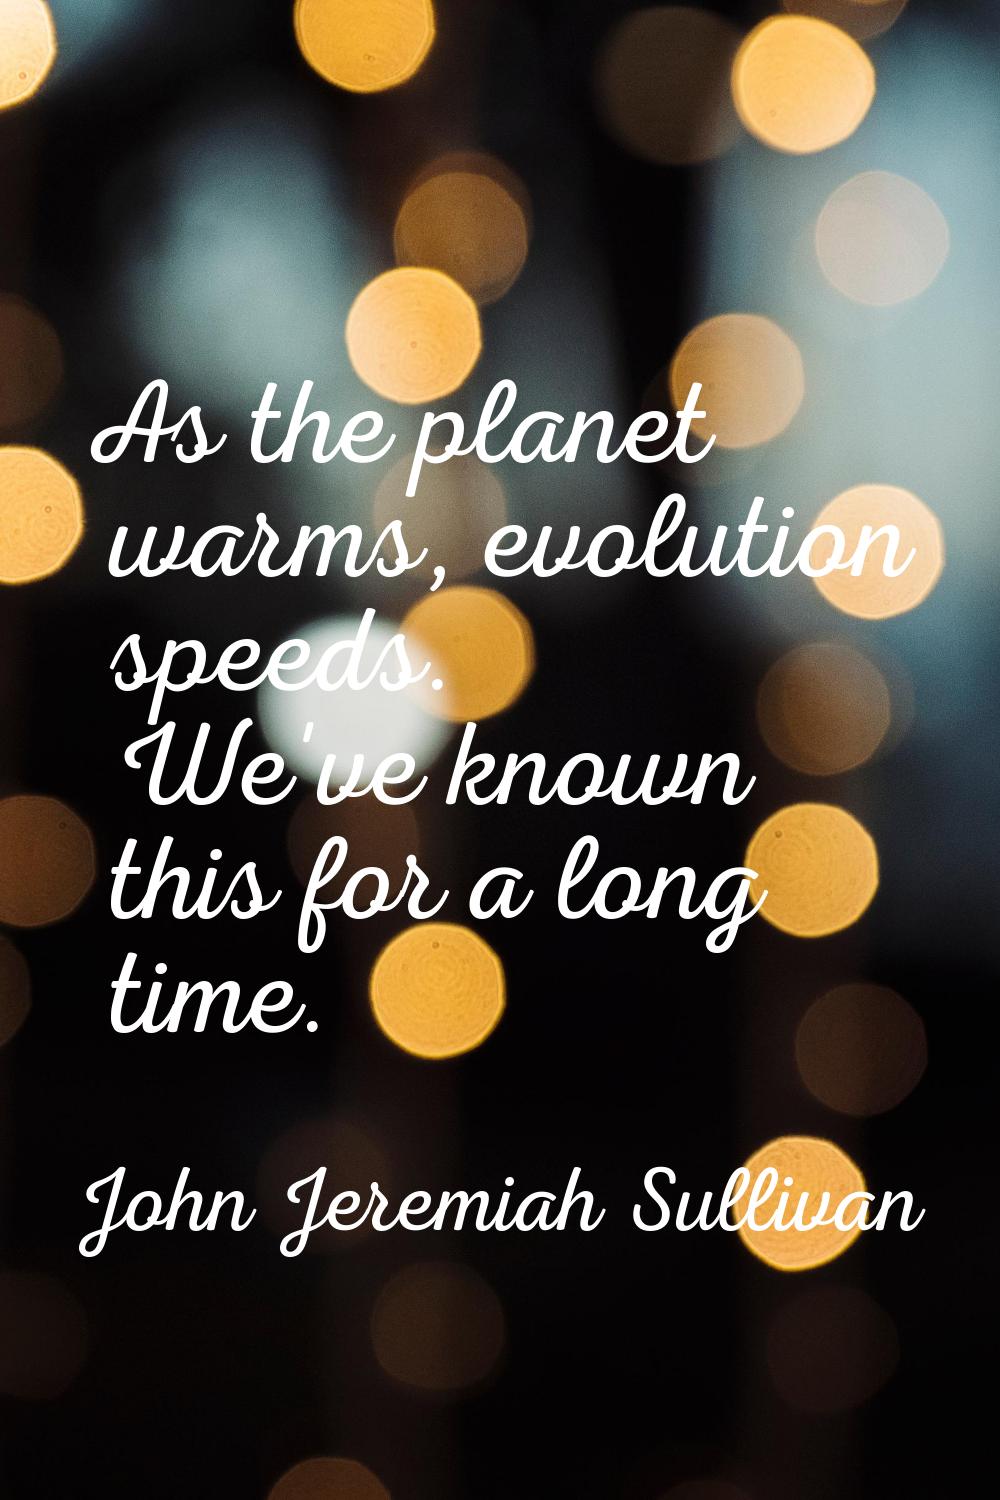 As the planet warms, evolution speeds. We've known this for a long time.